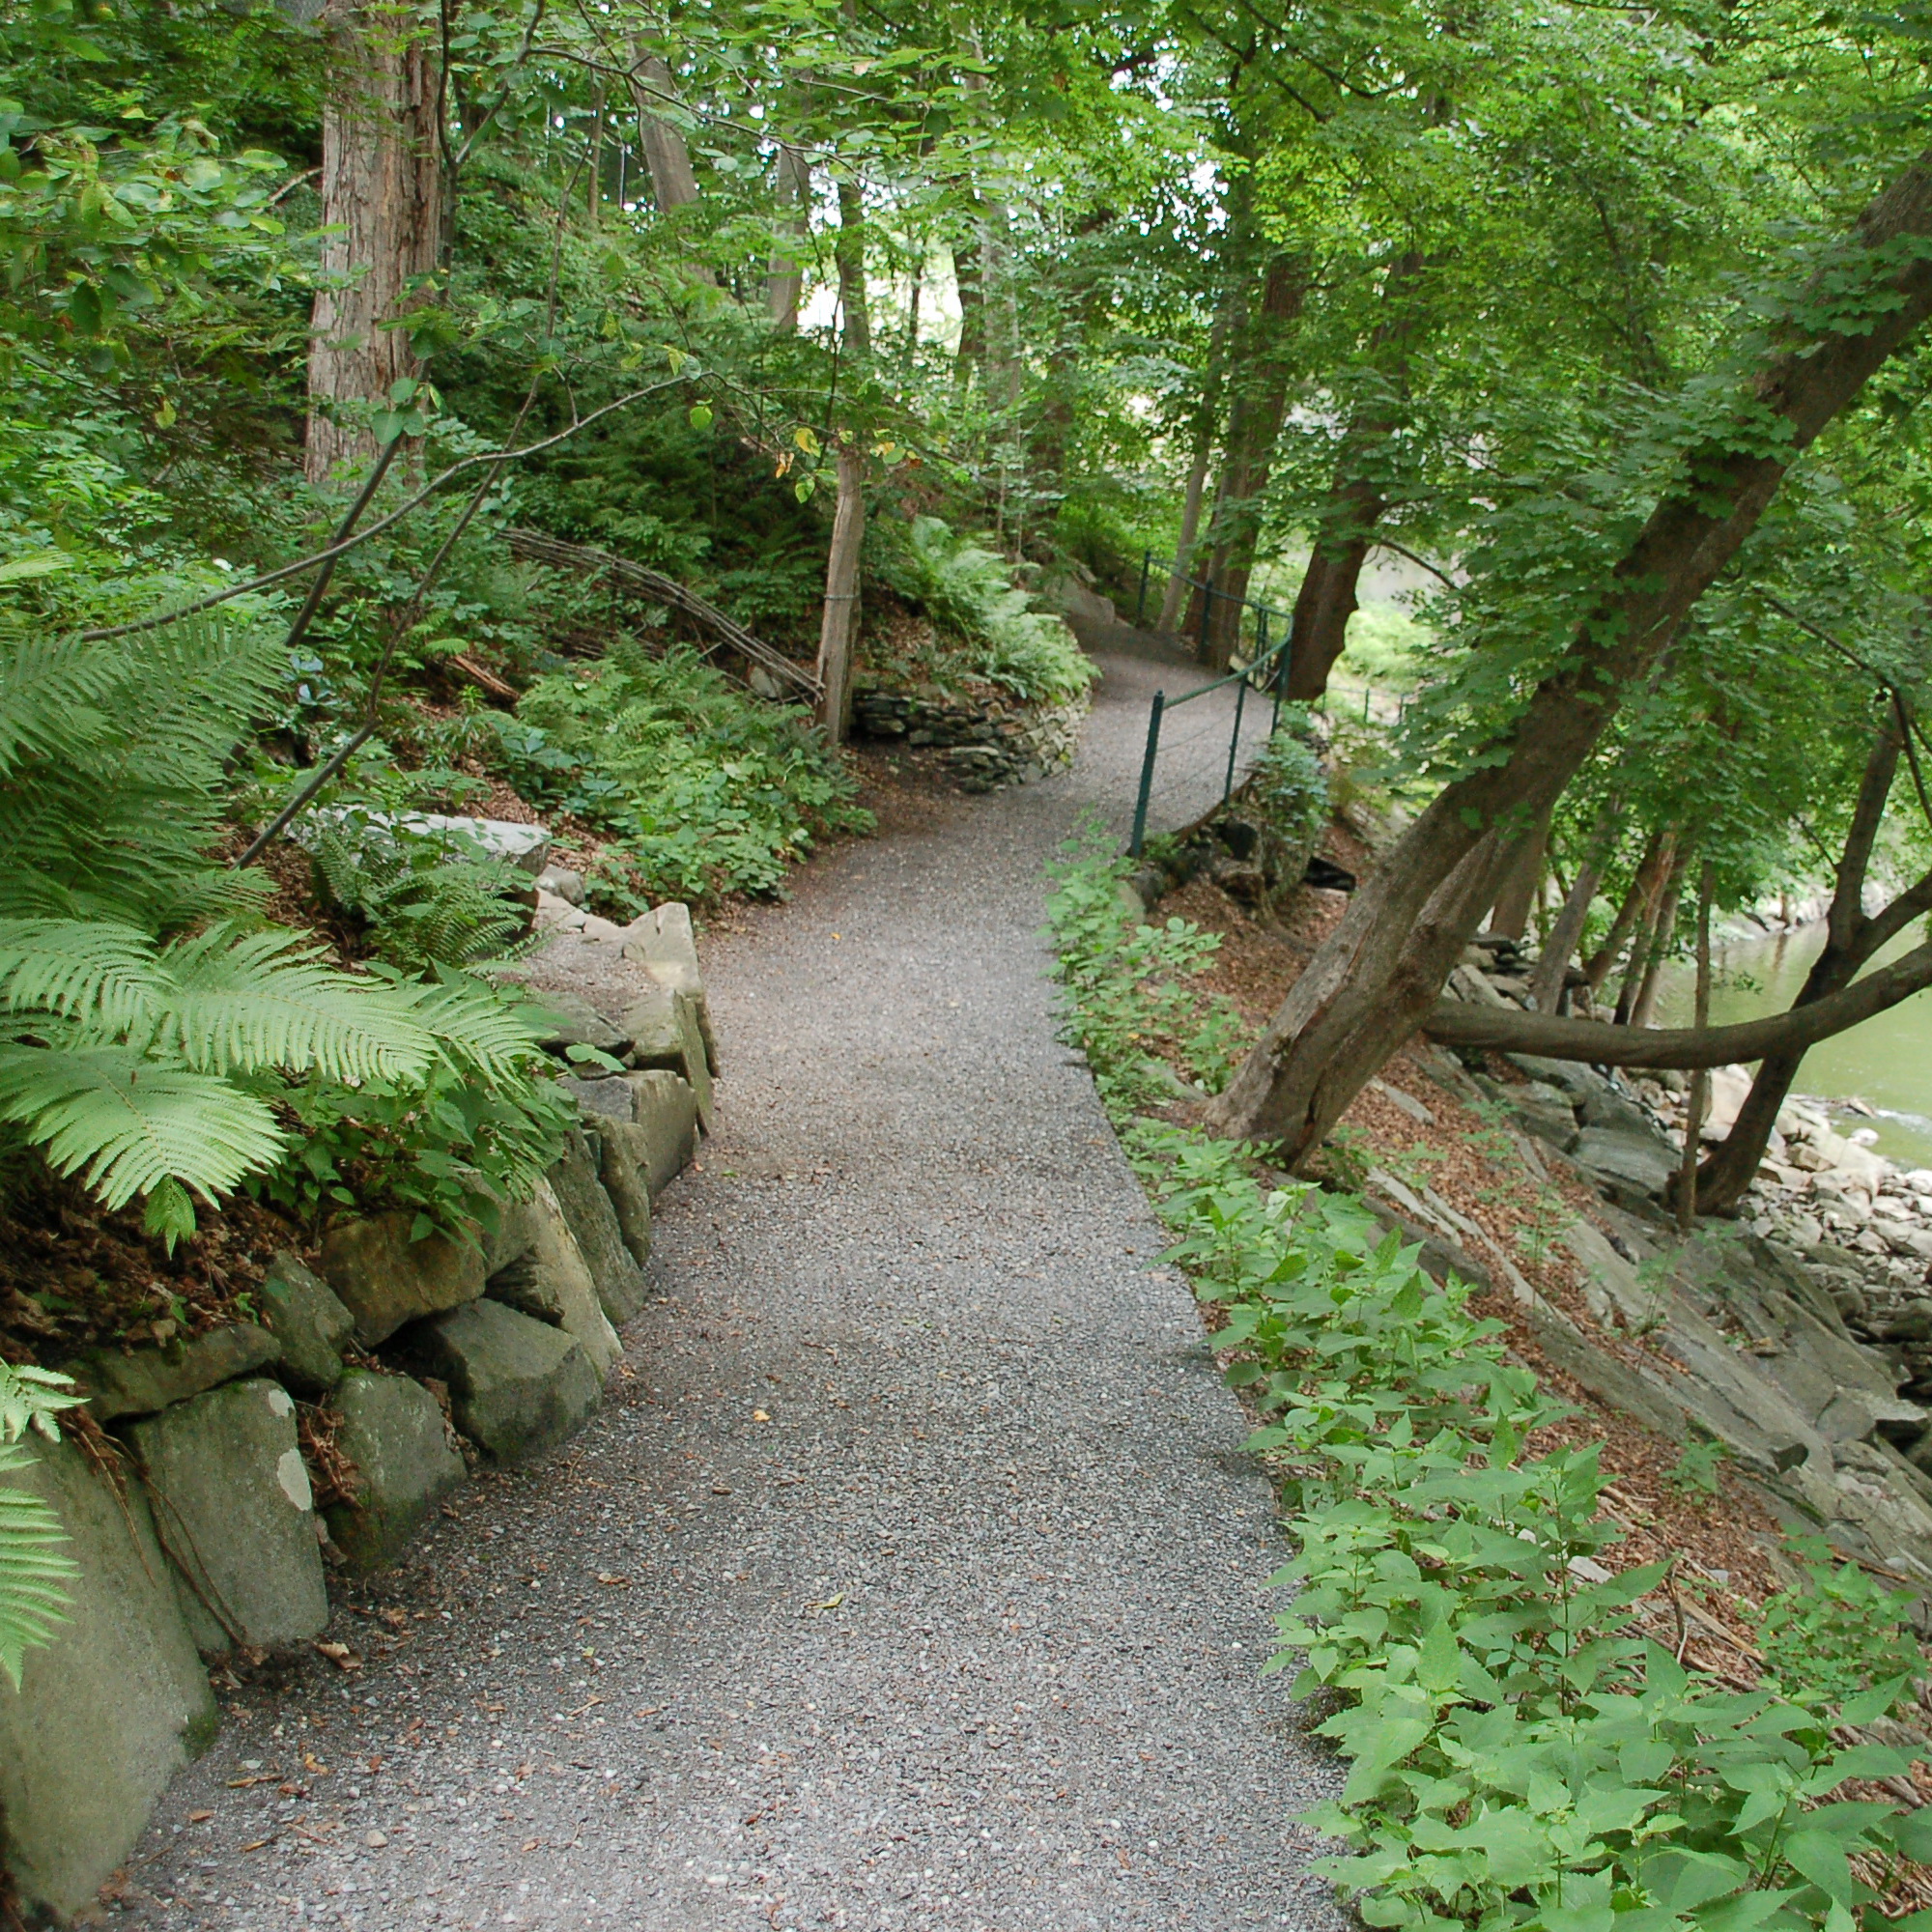 Peter Jensen to provide a Riverside Trail Conference in Great Barrington, MA 